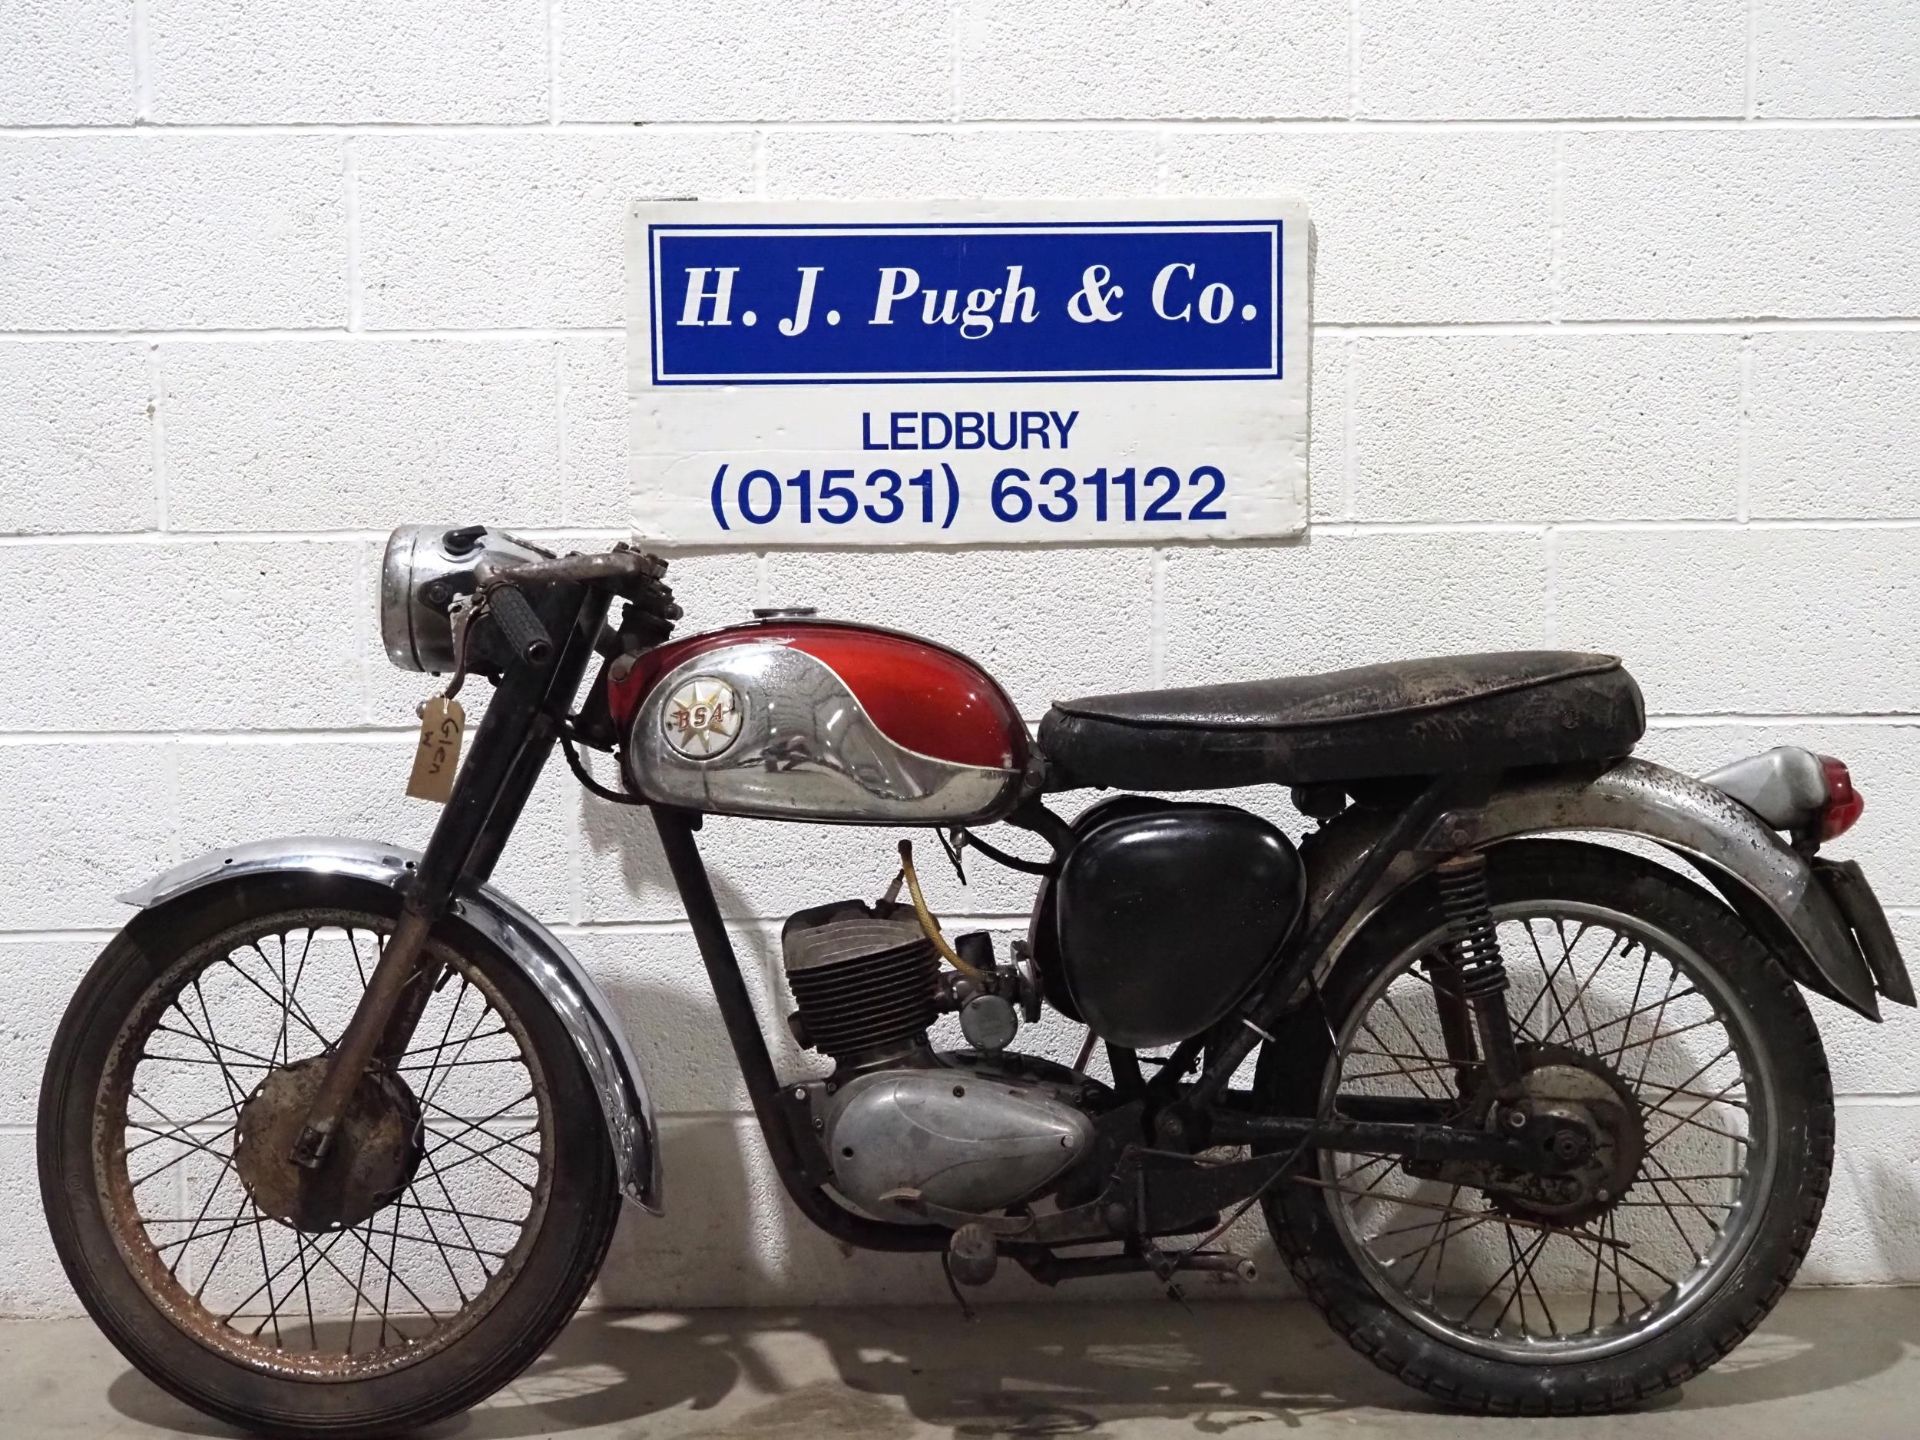 BSA Bantam D10 motorcycle project. 1967. 175cc. Engine turns over with compression. Reg. KHA 419E. - Image 6 of 6